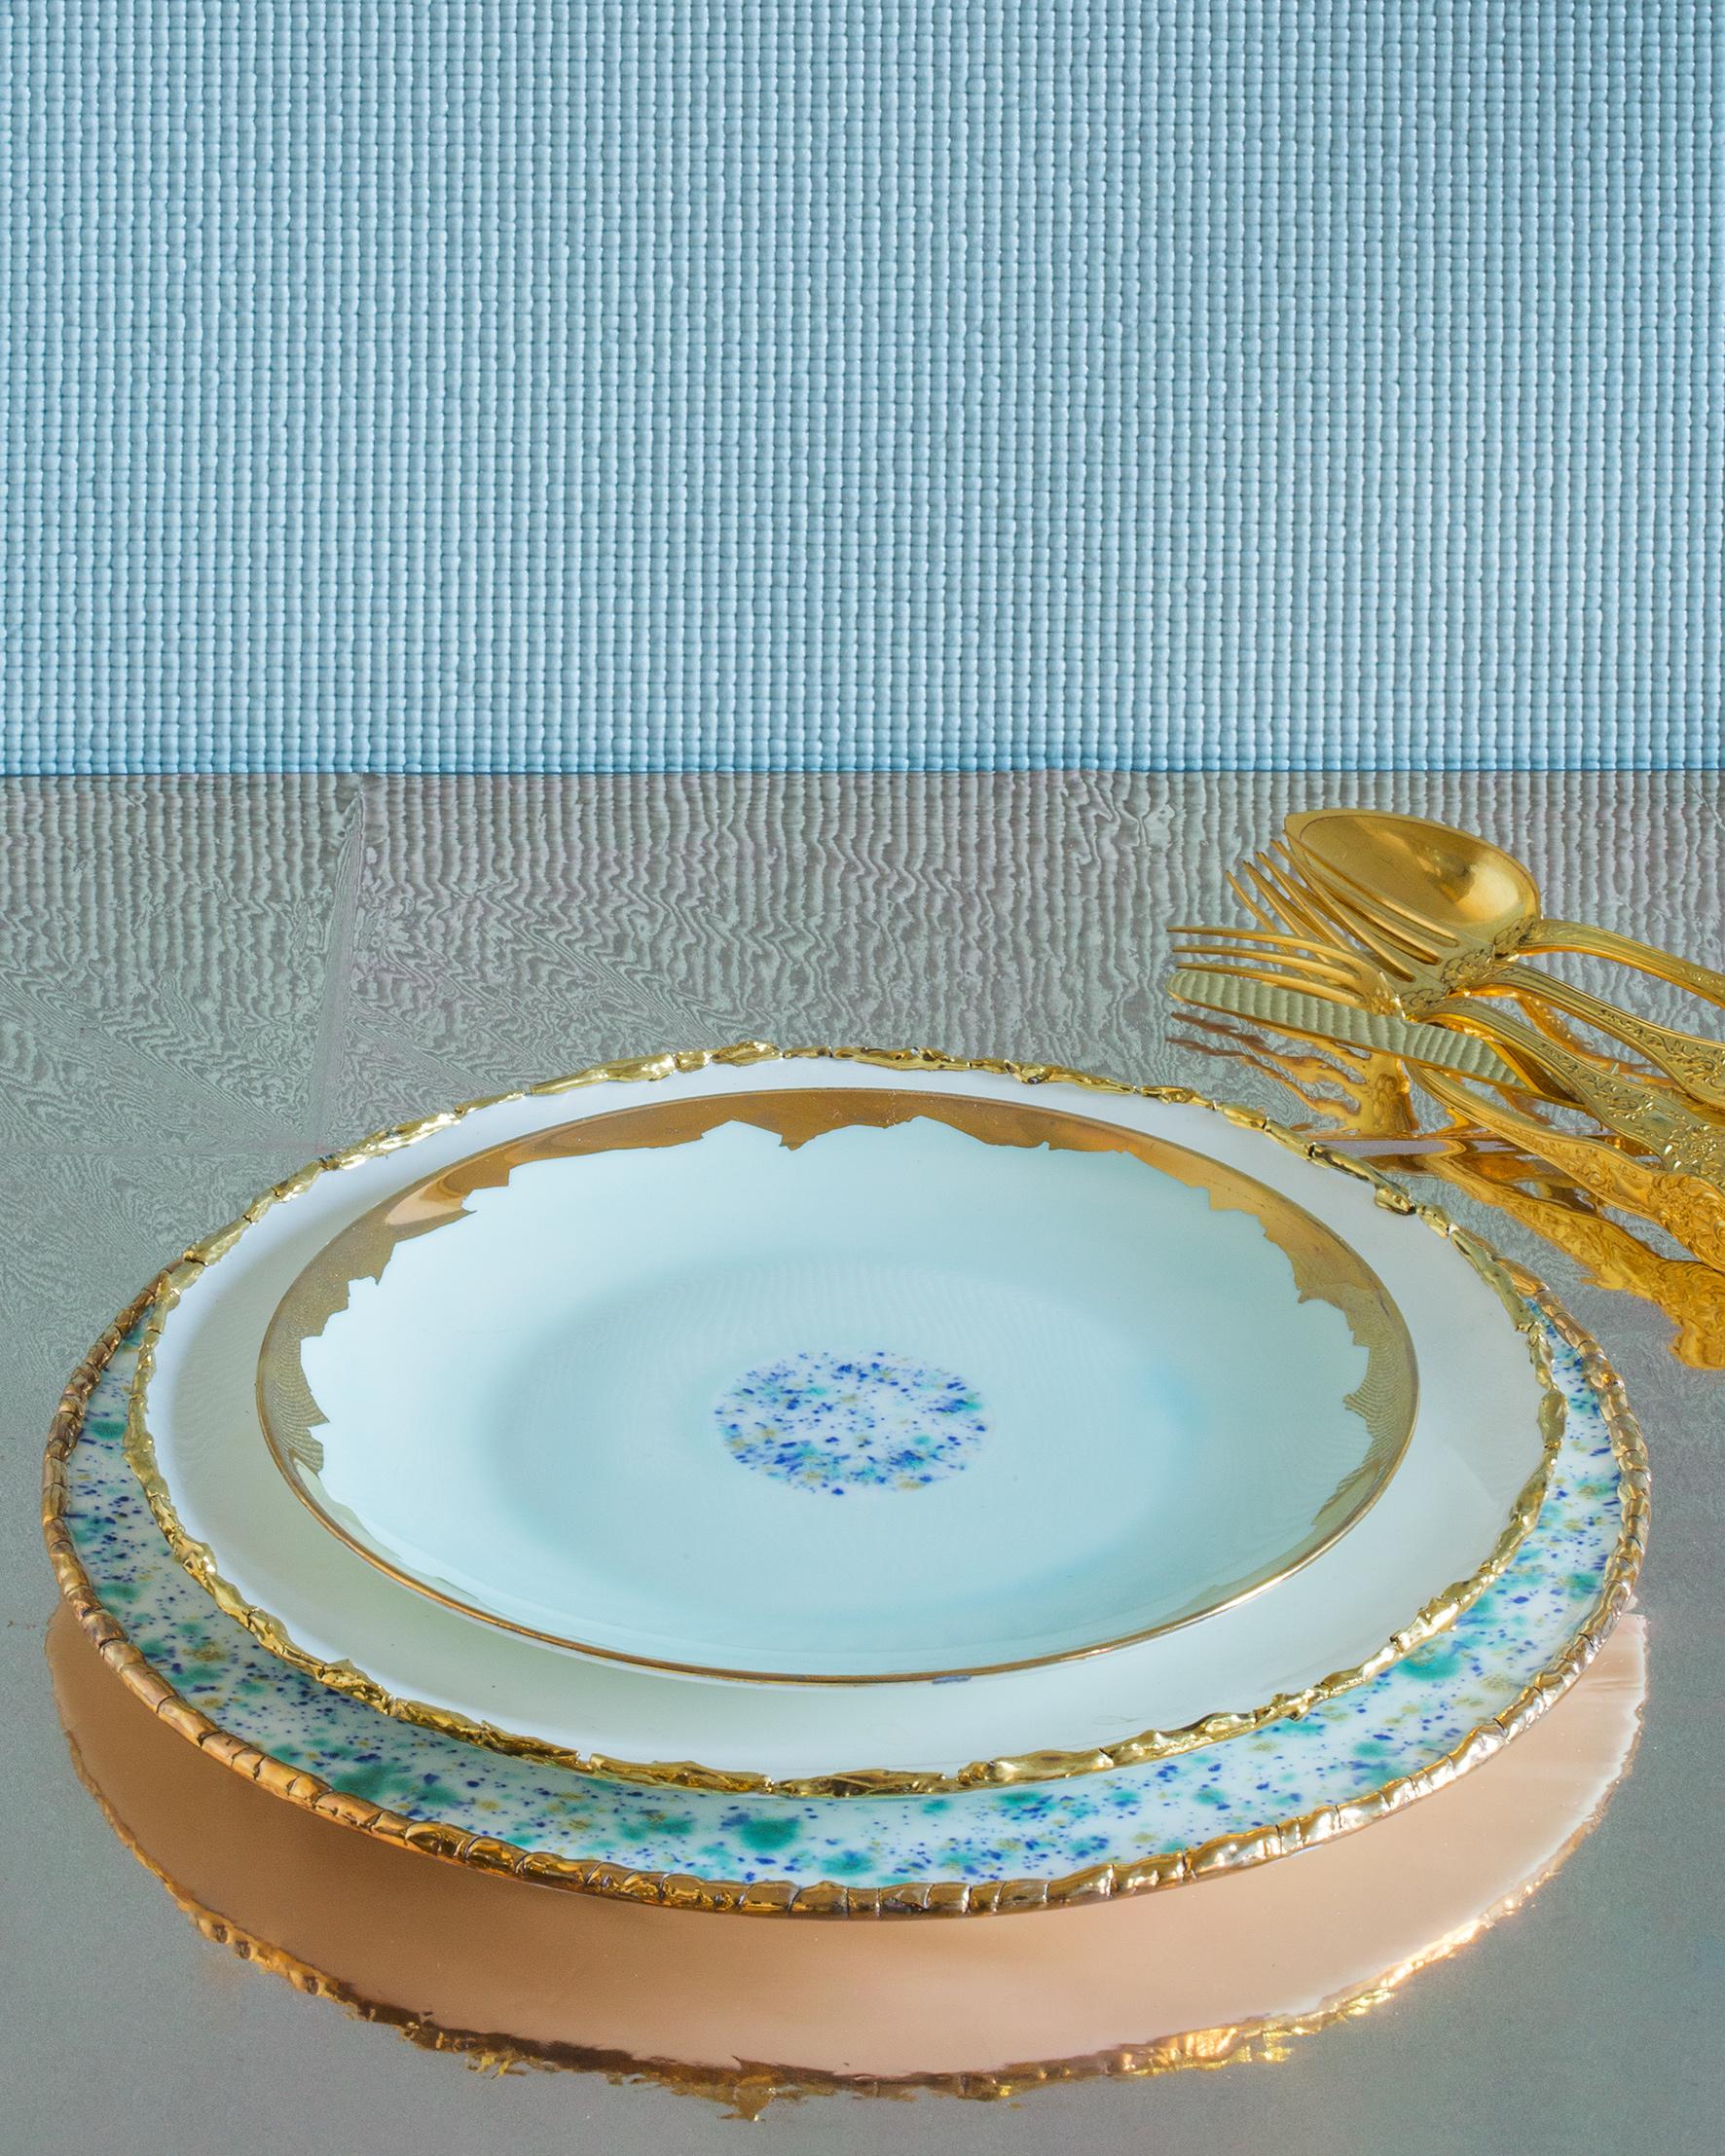 Handcrafted in Italy from the finest porcelain, this Blue Marble Drop Edge Dessert Coupe Plate has an original golden rim emphasizing the elegant emerald enamel with its blue yellow and green décor at the center.

Set of 2 dessert coupe plates, Drop